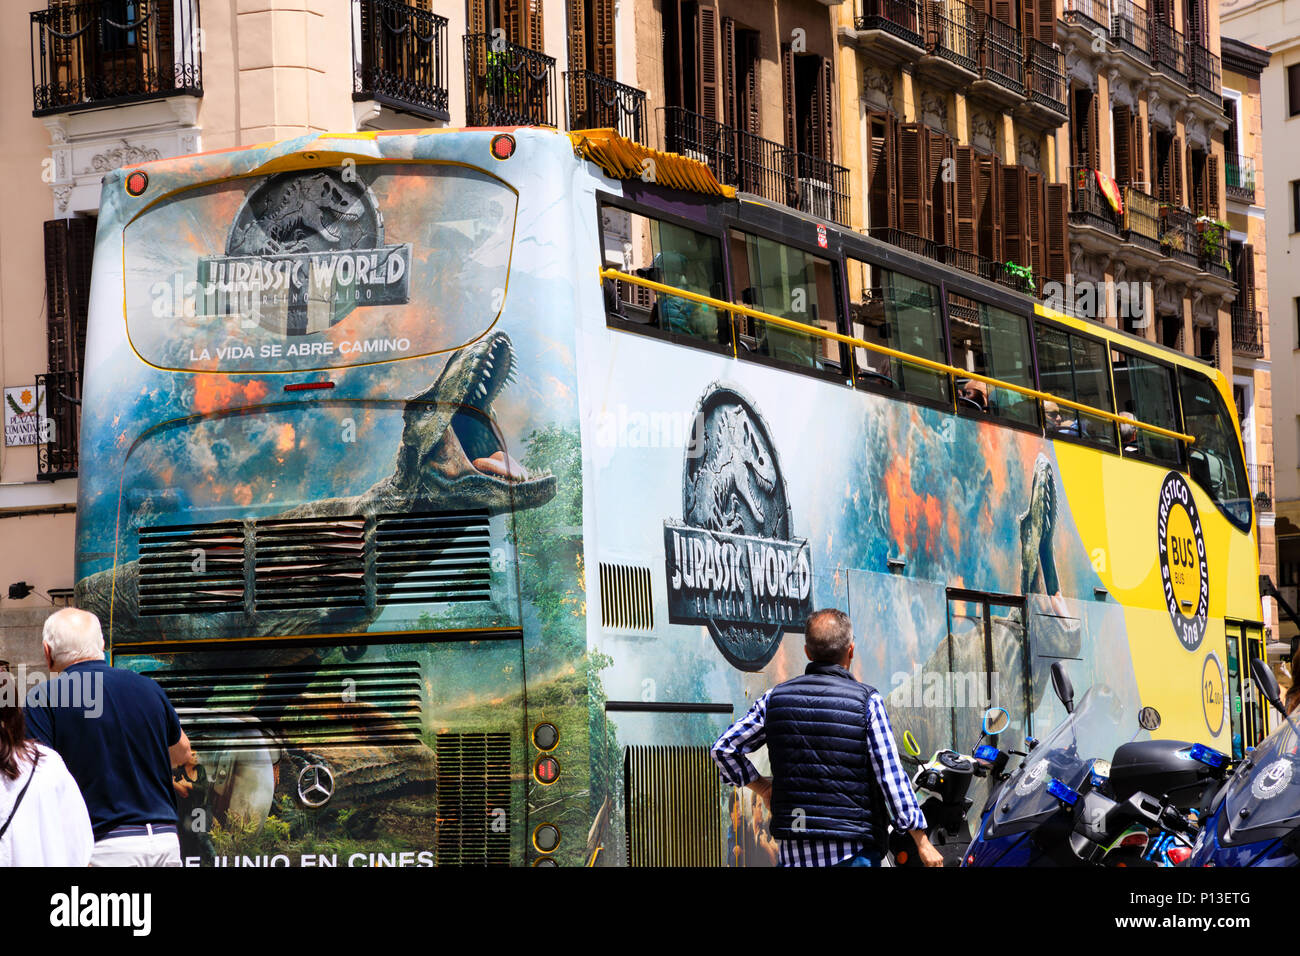 Open top double decker tourist sightseeing bus with Jurassic World movie advertising. Madrid, Spain. May 2018 Stock Photo